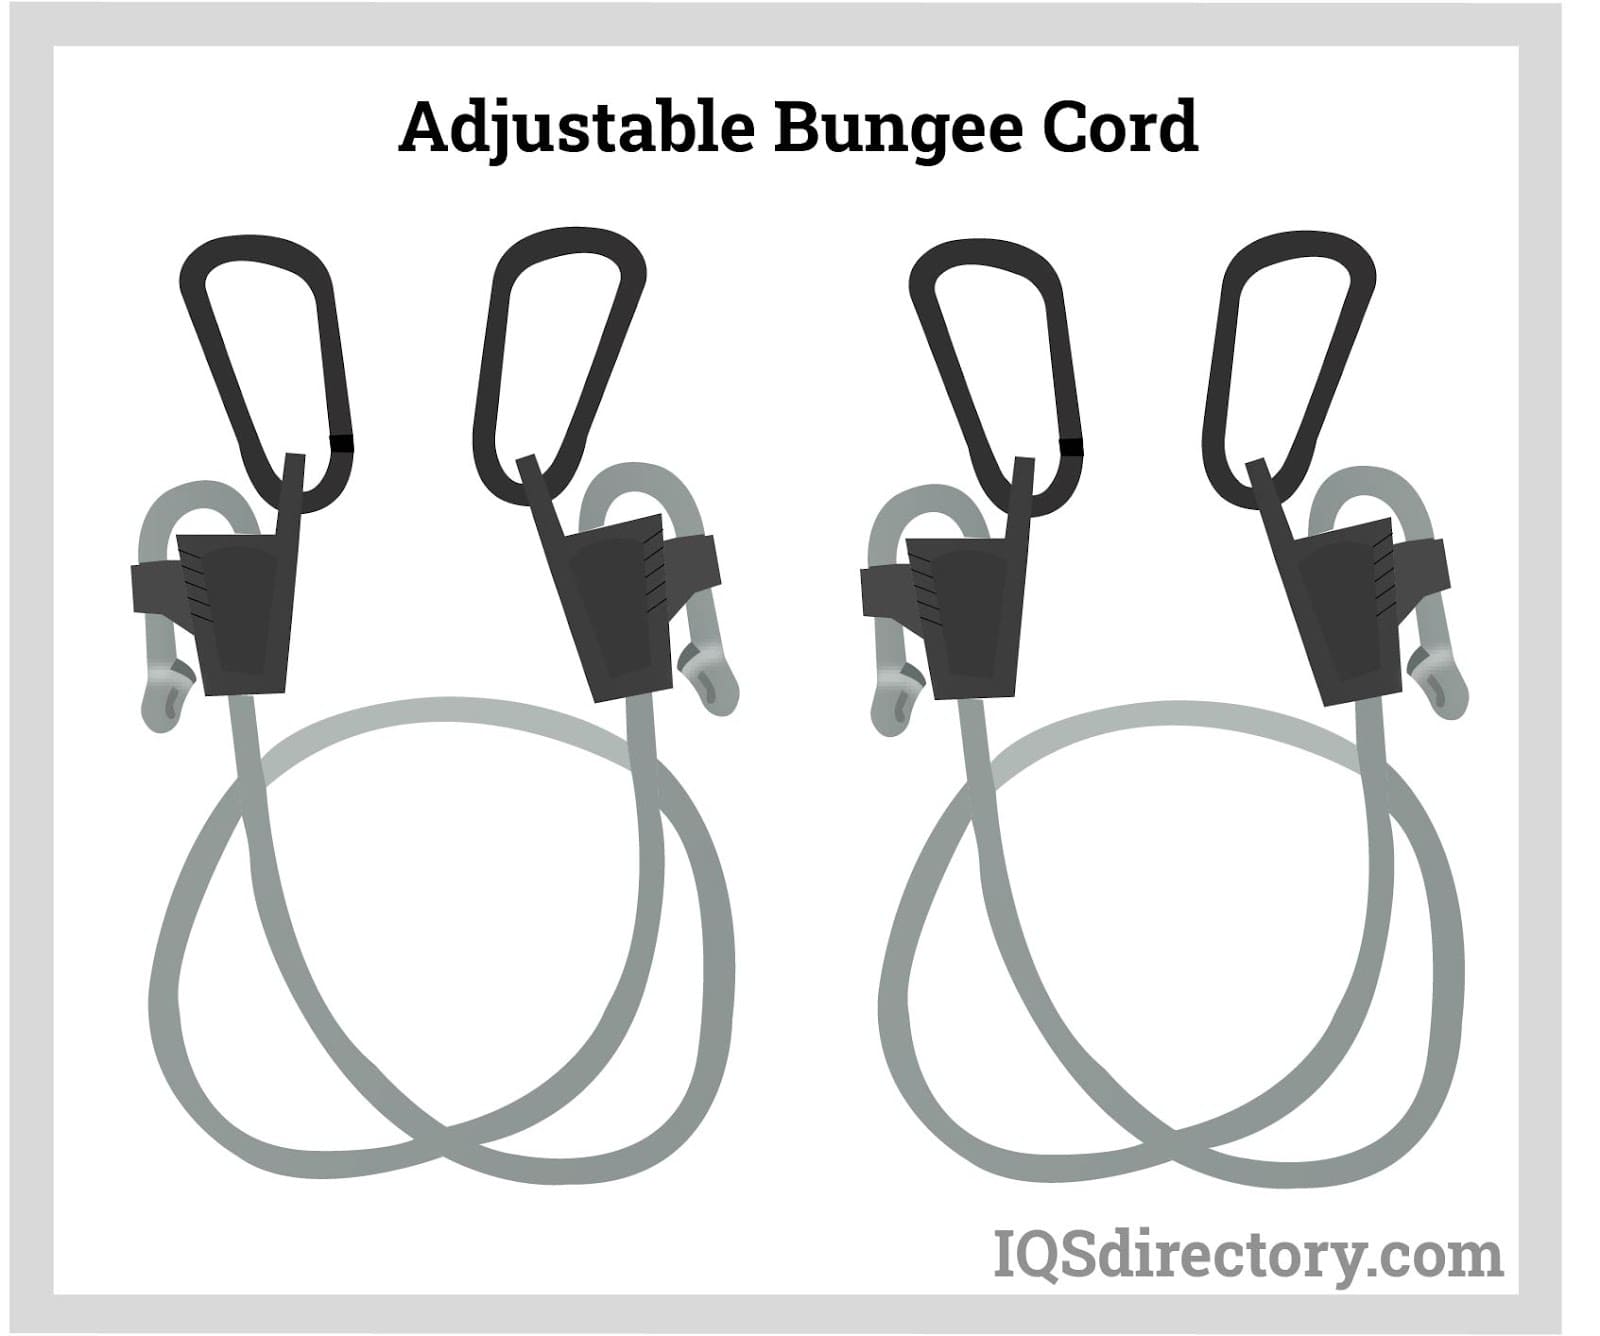 Shock, Bungee, and Elastic Cord: Types, Design, Uses, and Benefits